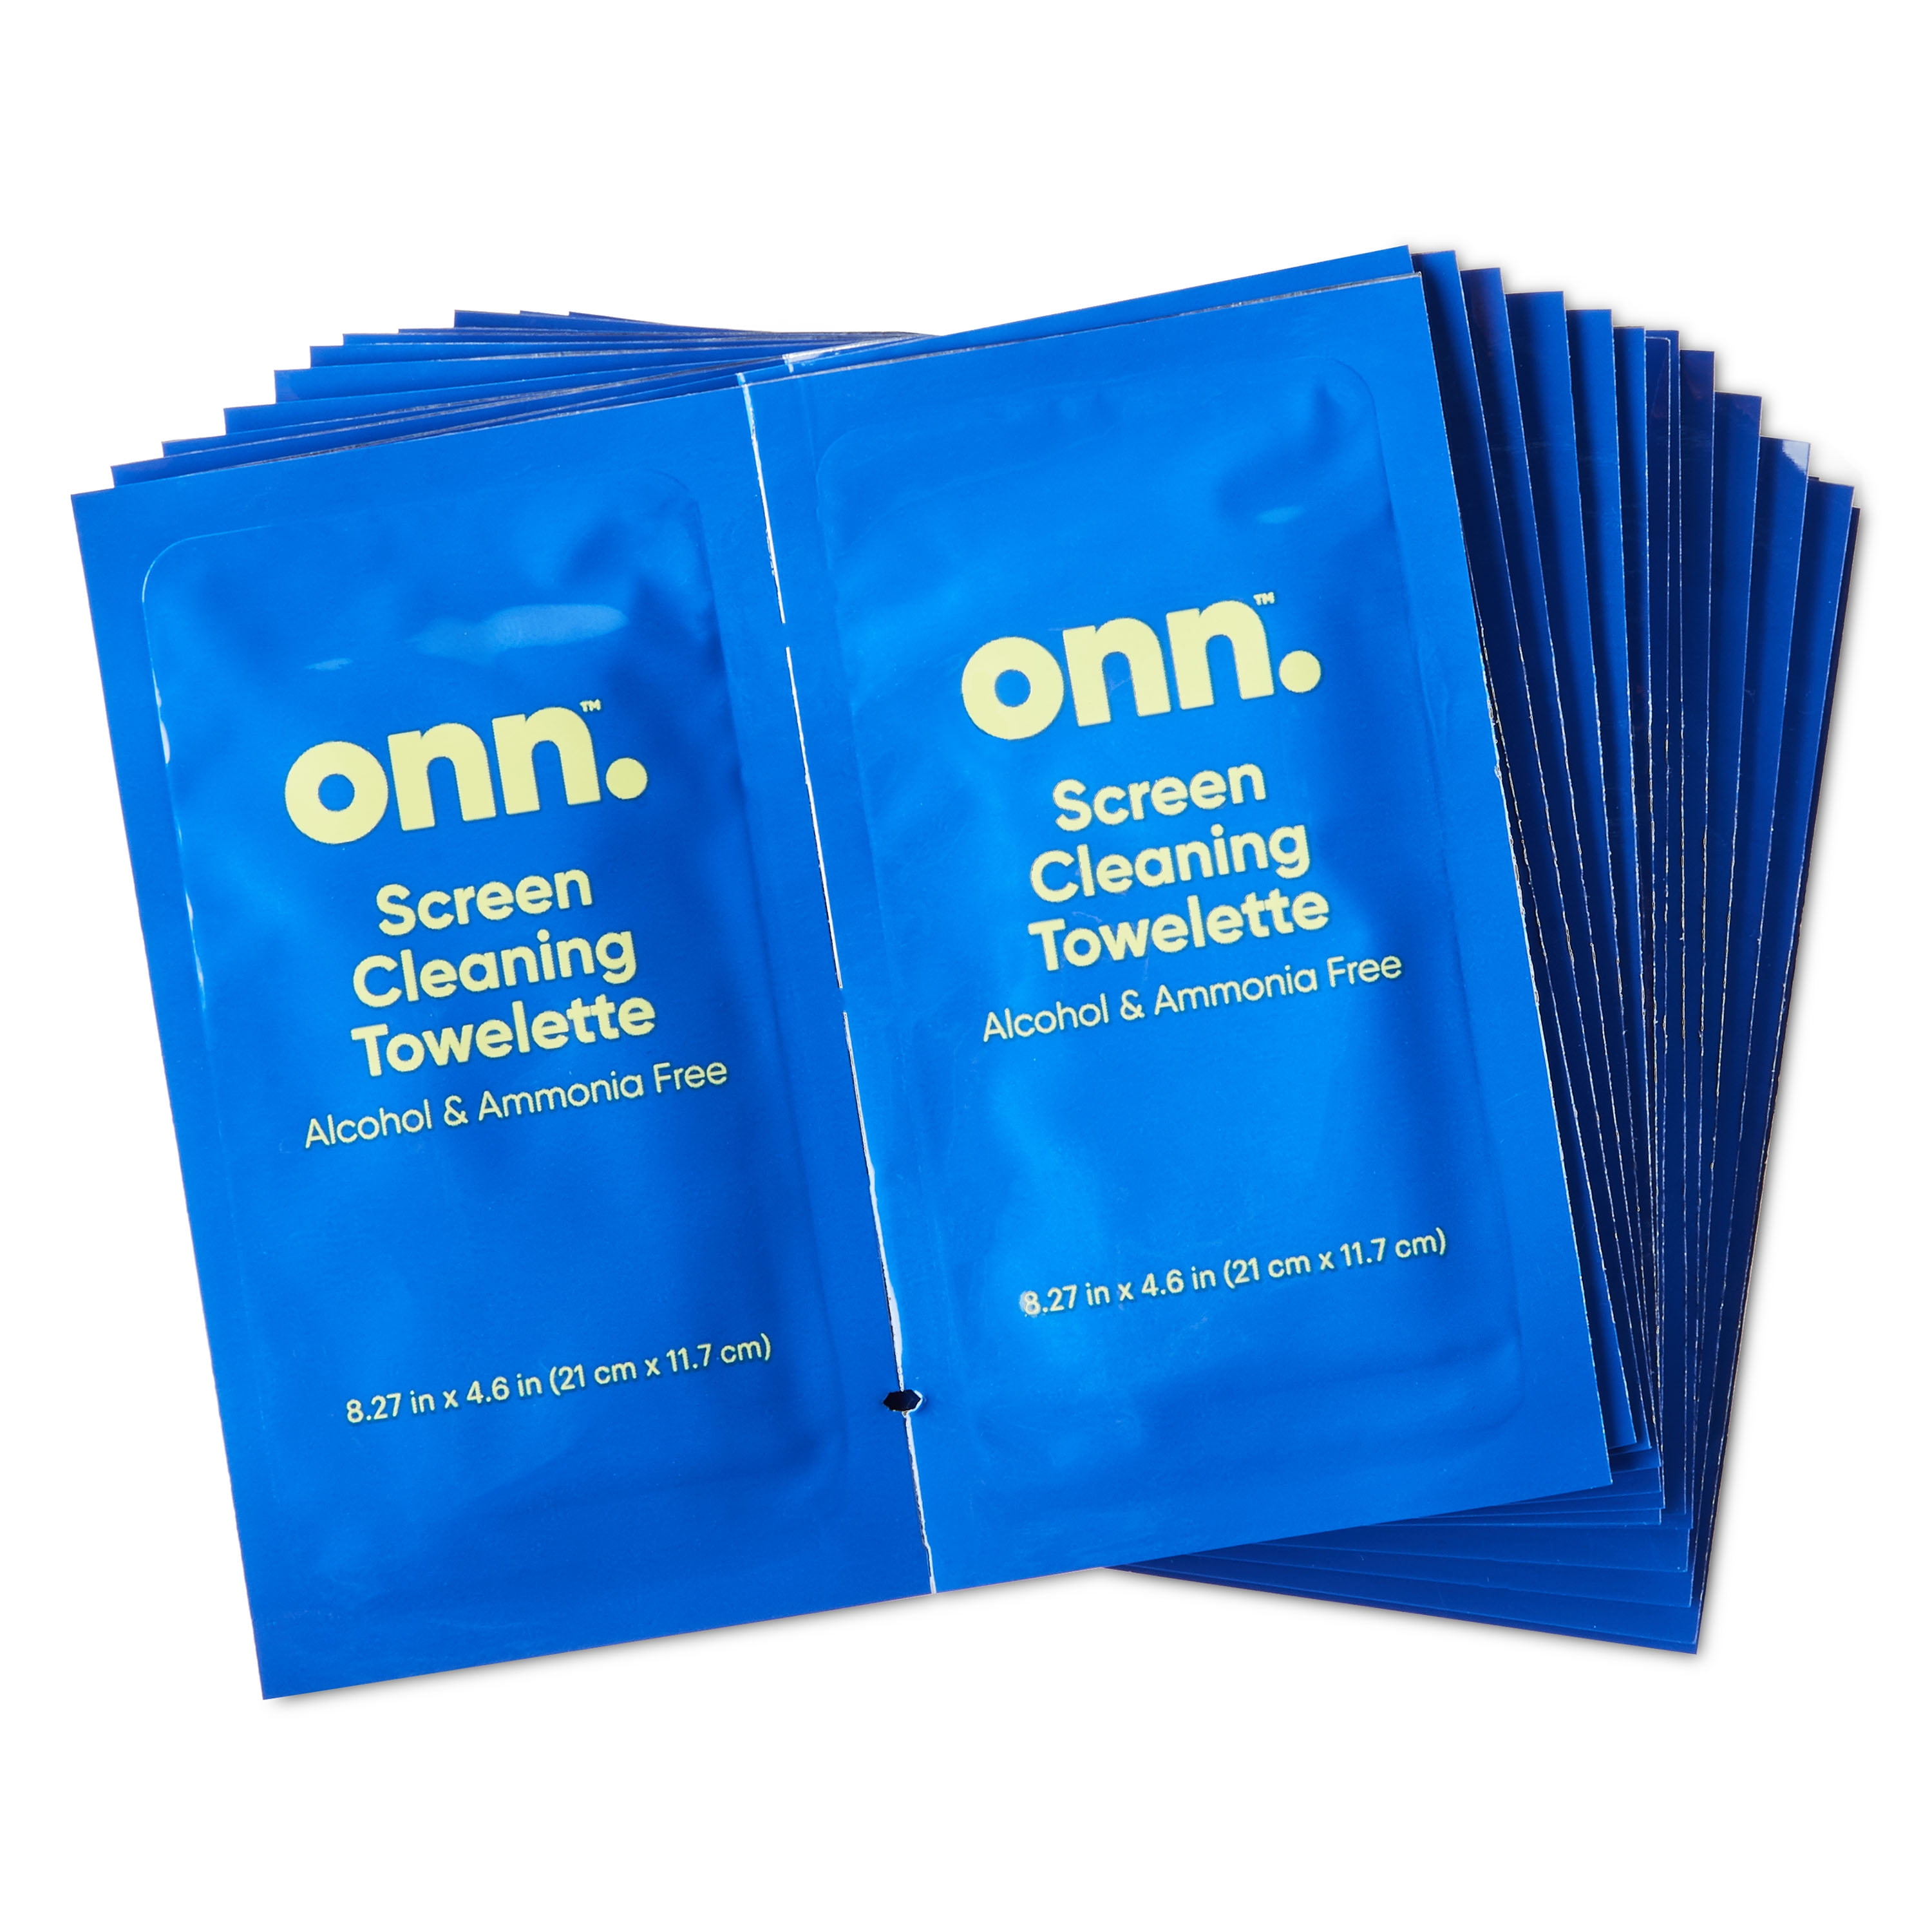 onn. Screen Cleaning Towelettes, Pack of 30